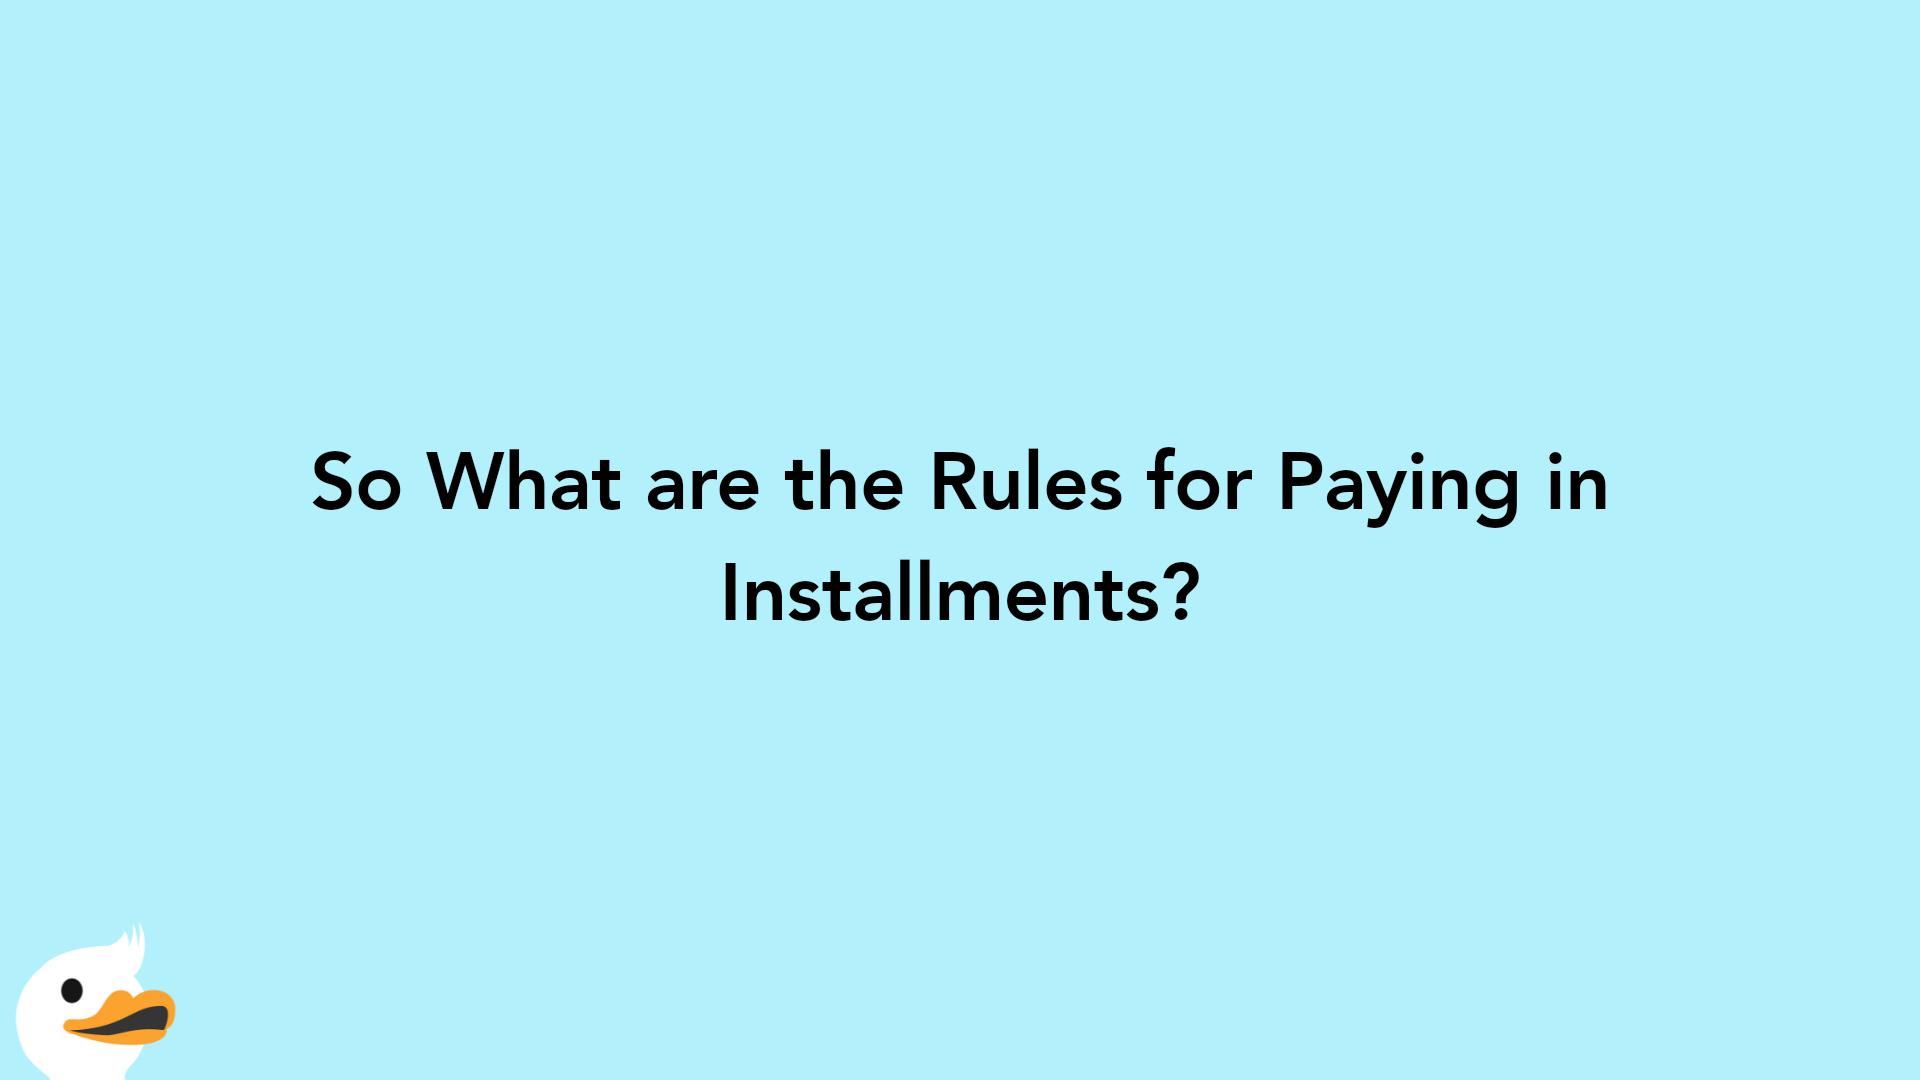 So What are the Rules for Paying in Installments?